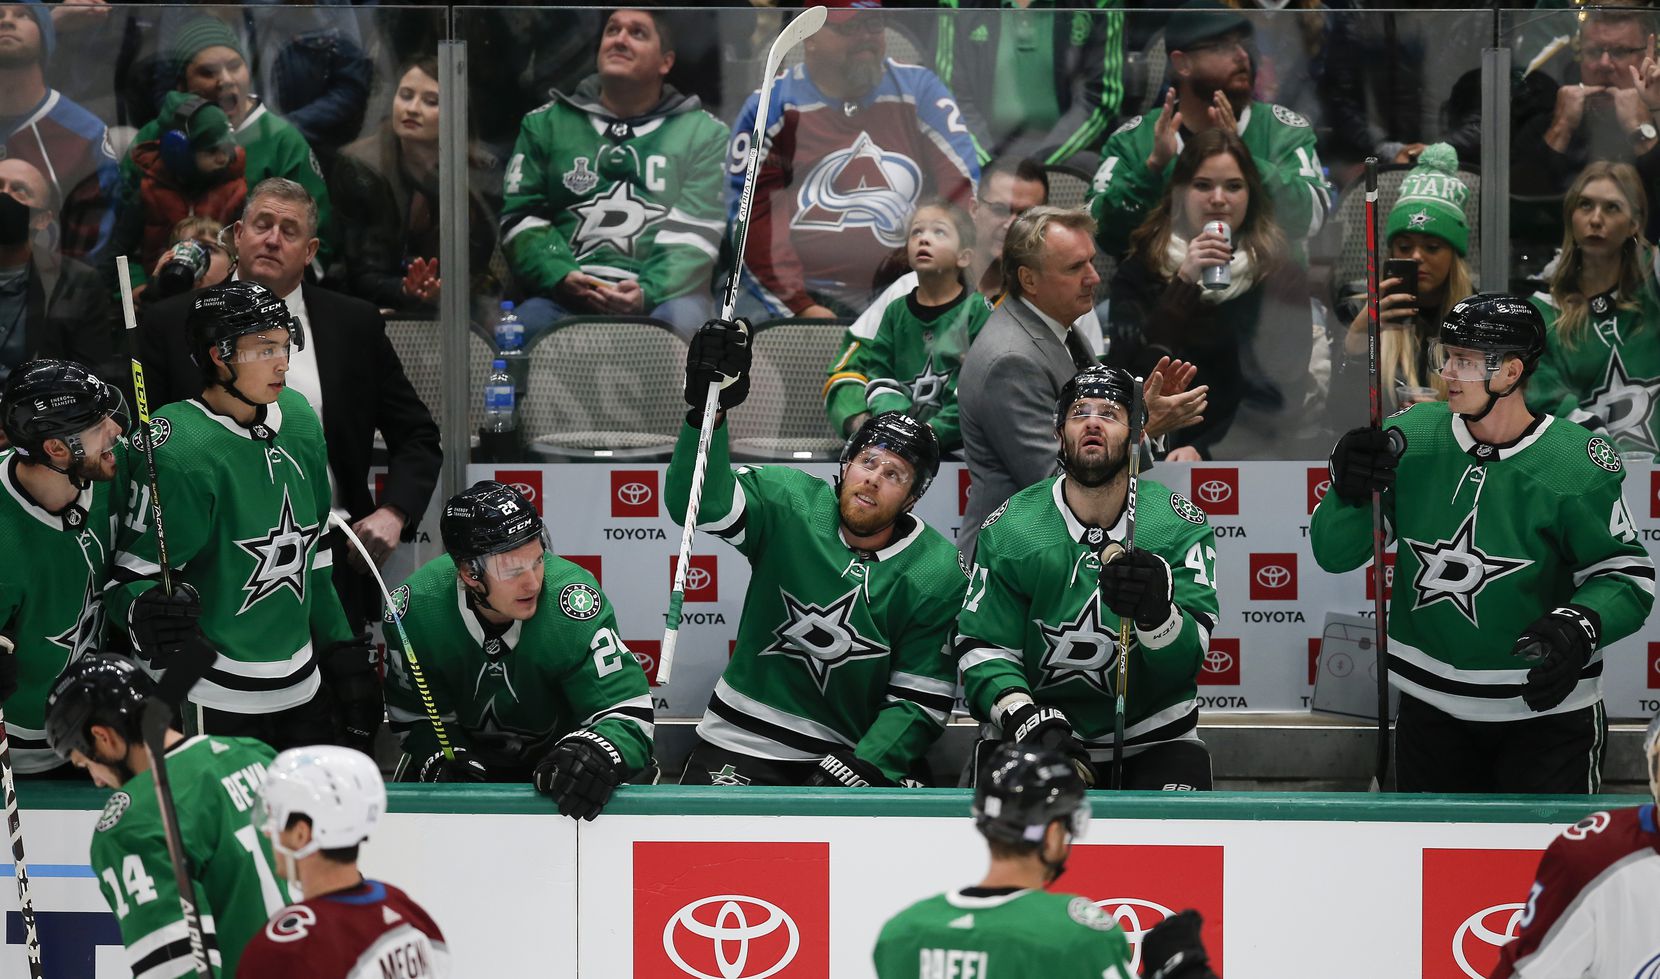 Dallas Stars forward Joe Pavelski, center, acknowledges fans after it was announced that he had scored 400 NHL career goals, with his second goal of the game, during the first period of an NHL hockey game against the Colorado Avalanche in Dallas, Friday, November 26, 2021. (Brandon Wade/Special Contributor)